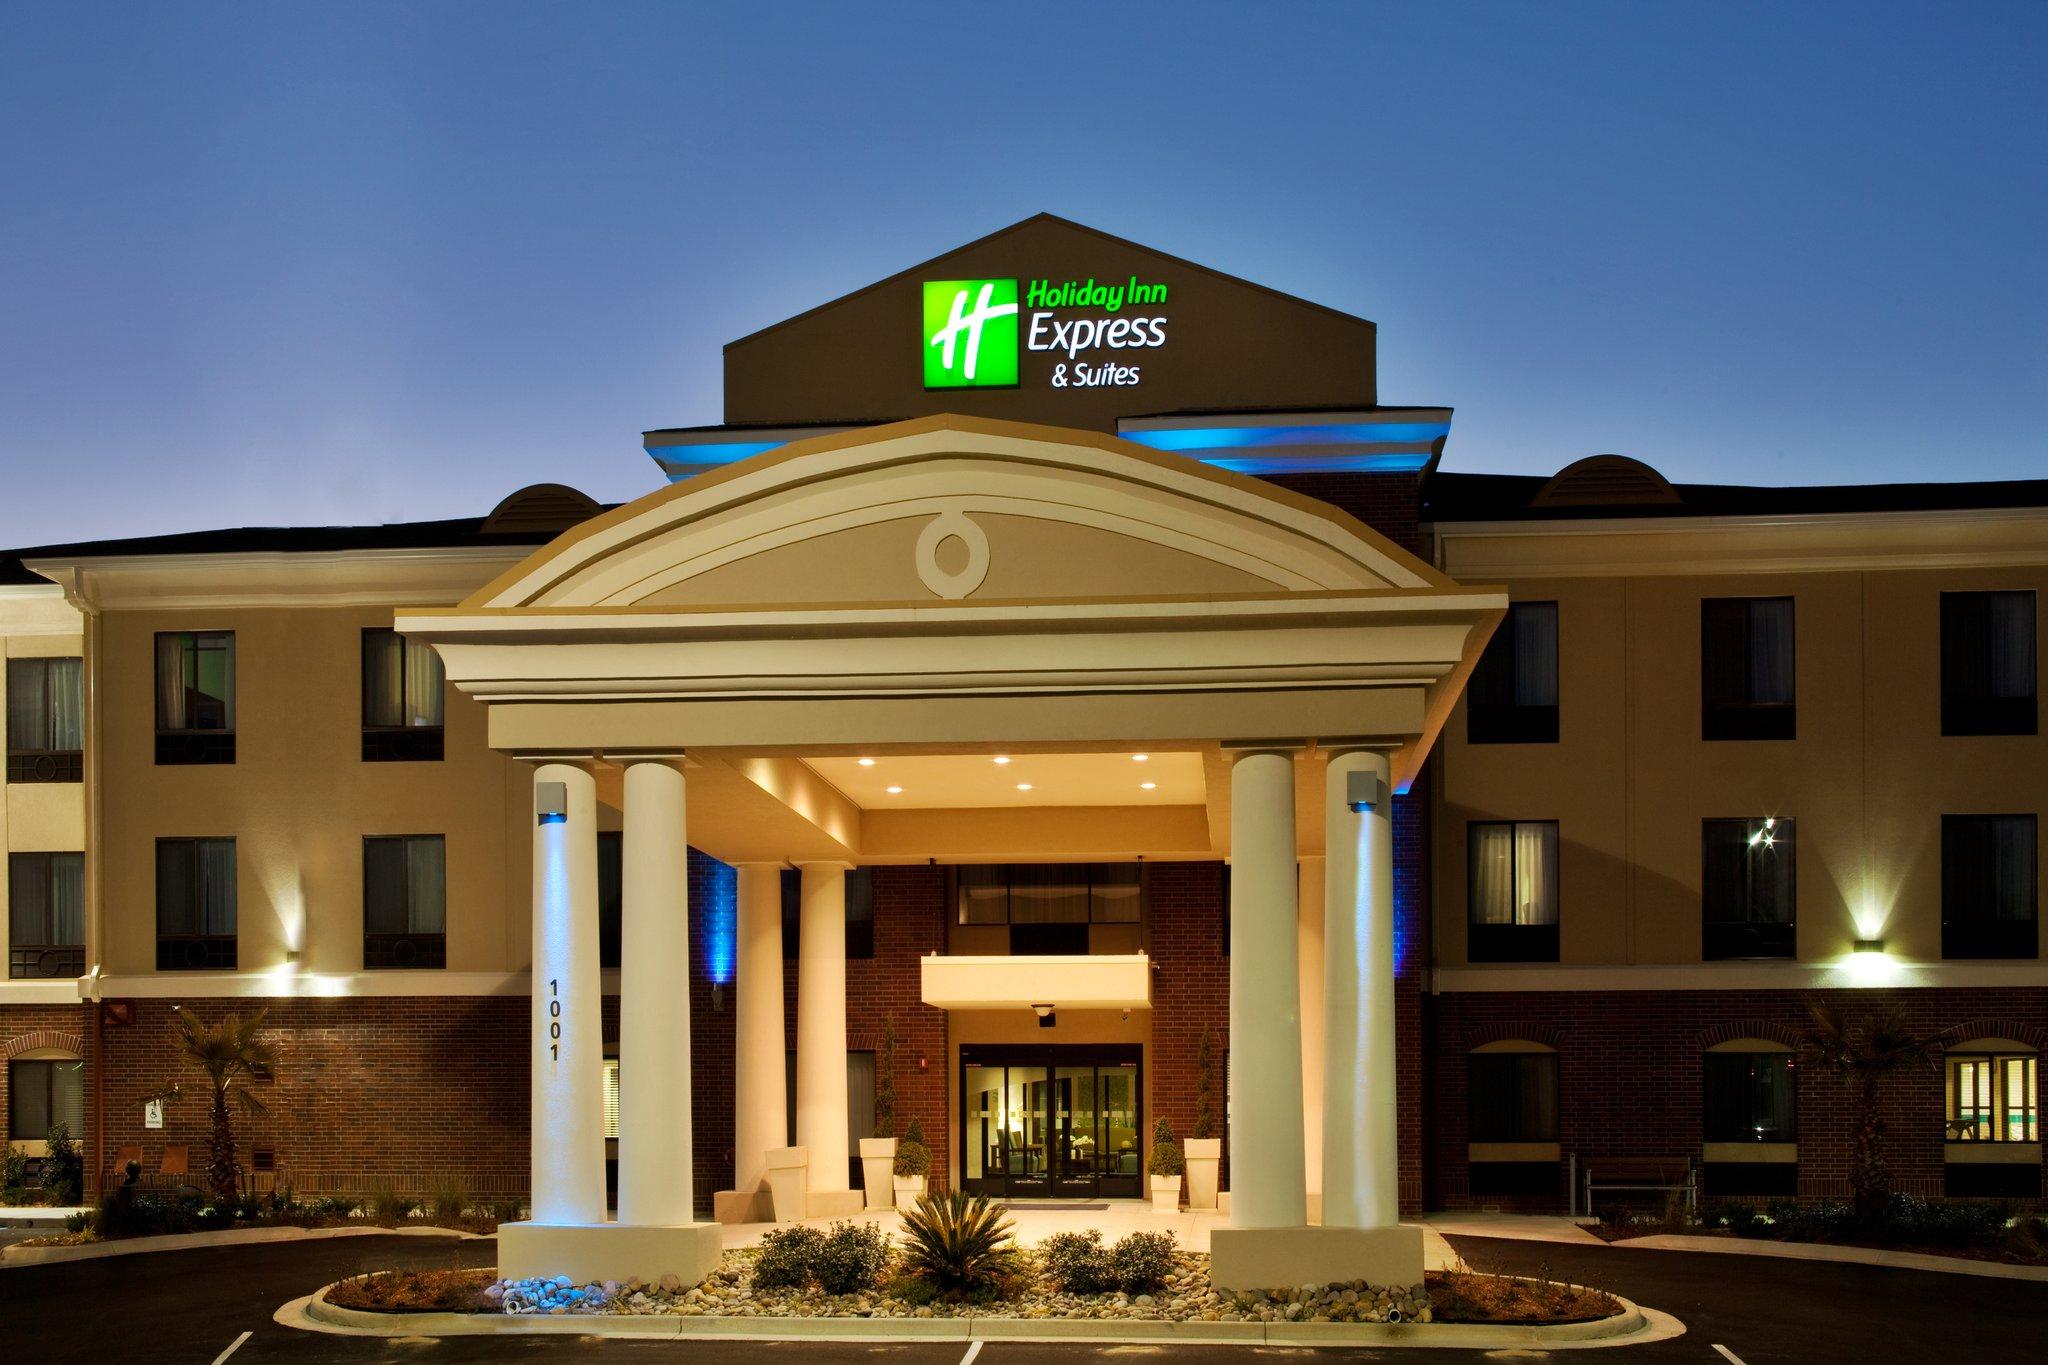 Holiday Inn Express Hotel & Suites Picayune in Picayune, MS